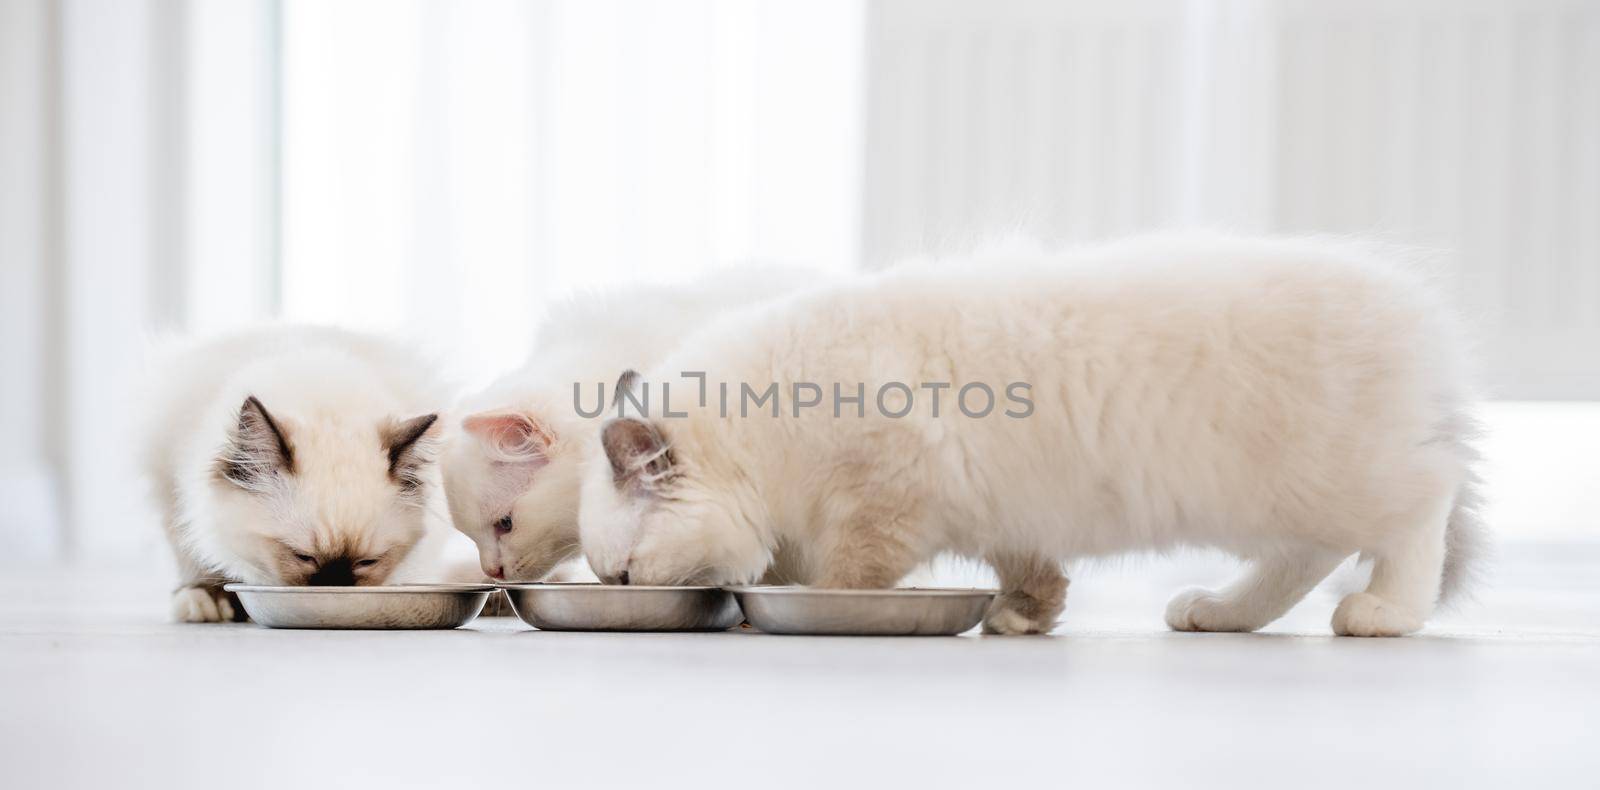 Three lovely fluffy white ragdoll cats sitting on the floor and eating feed from bowls in light room. Beautiful purebred feline pets outdoors with food together